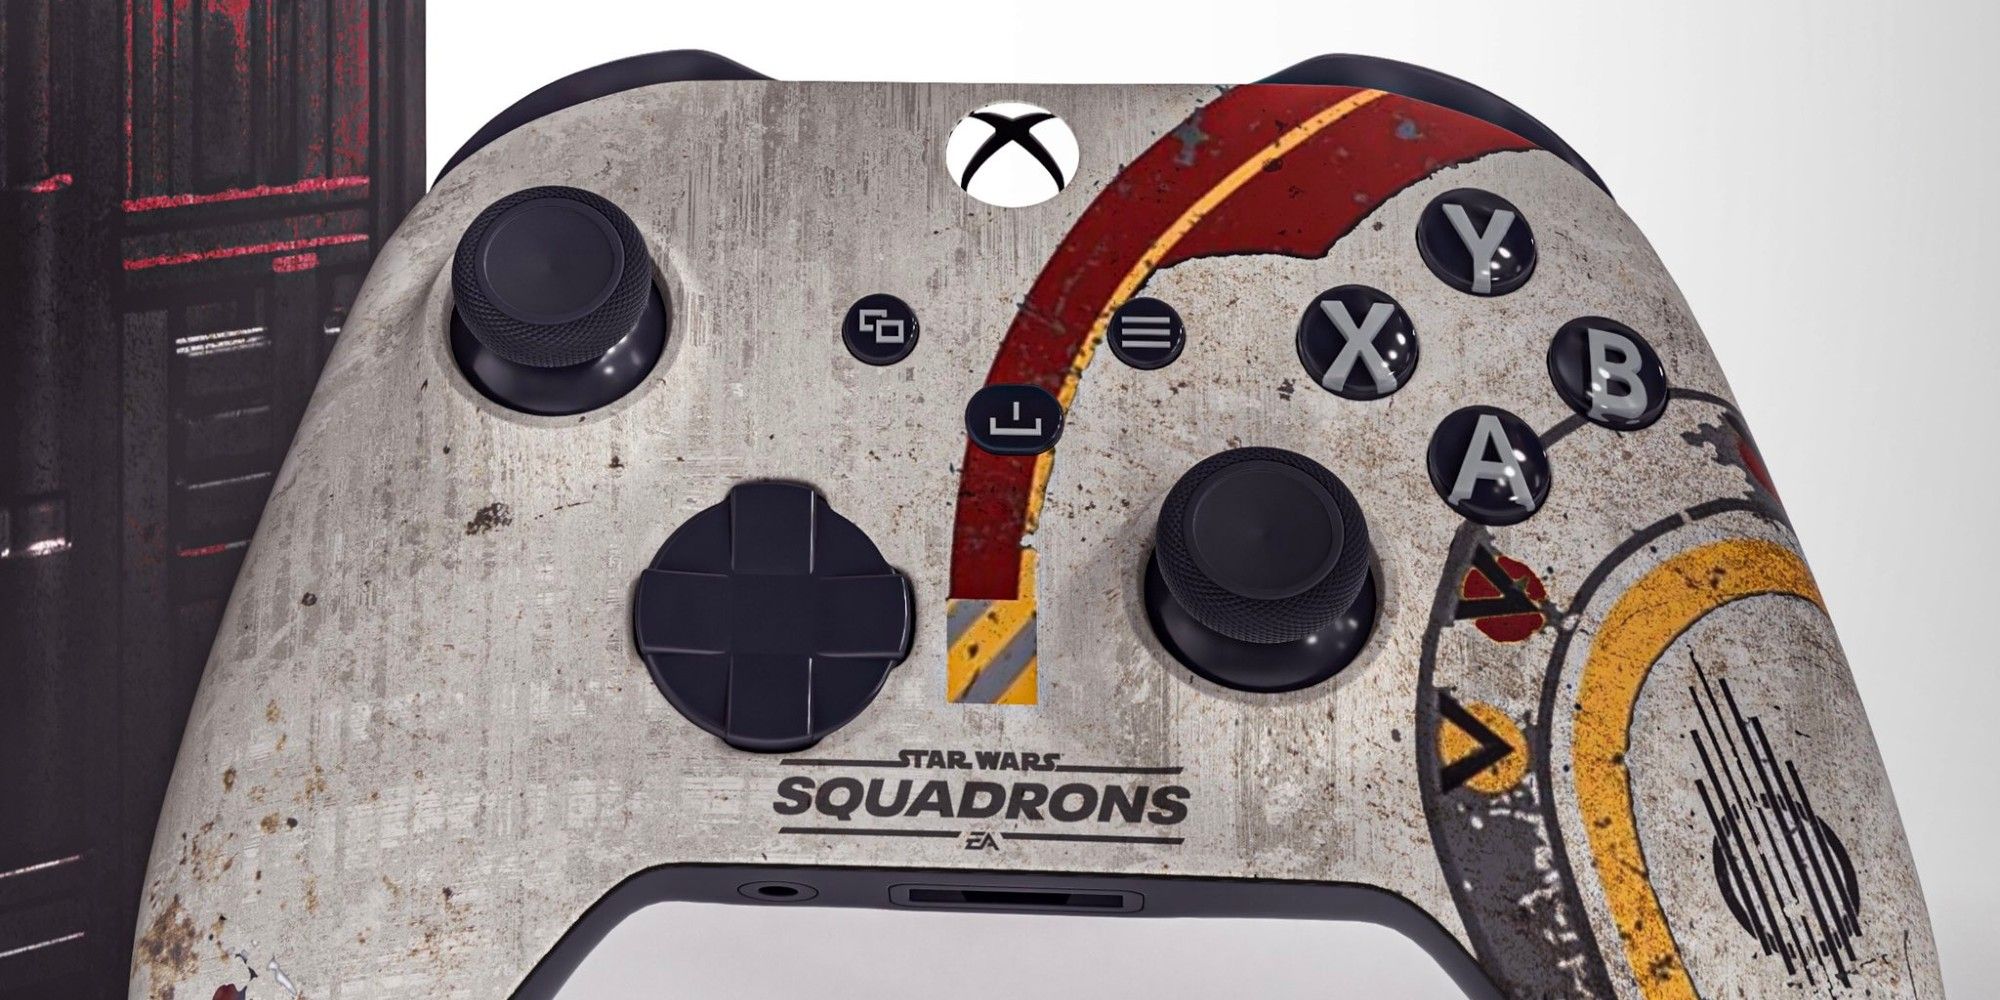 What A Star Wars Squadrons Xbox Series X Should Look Like